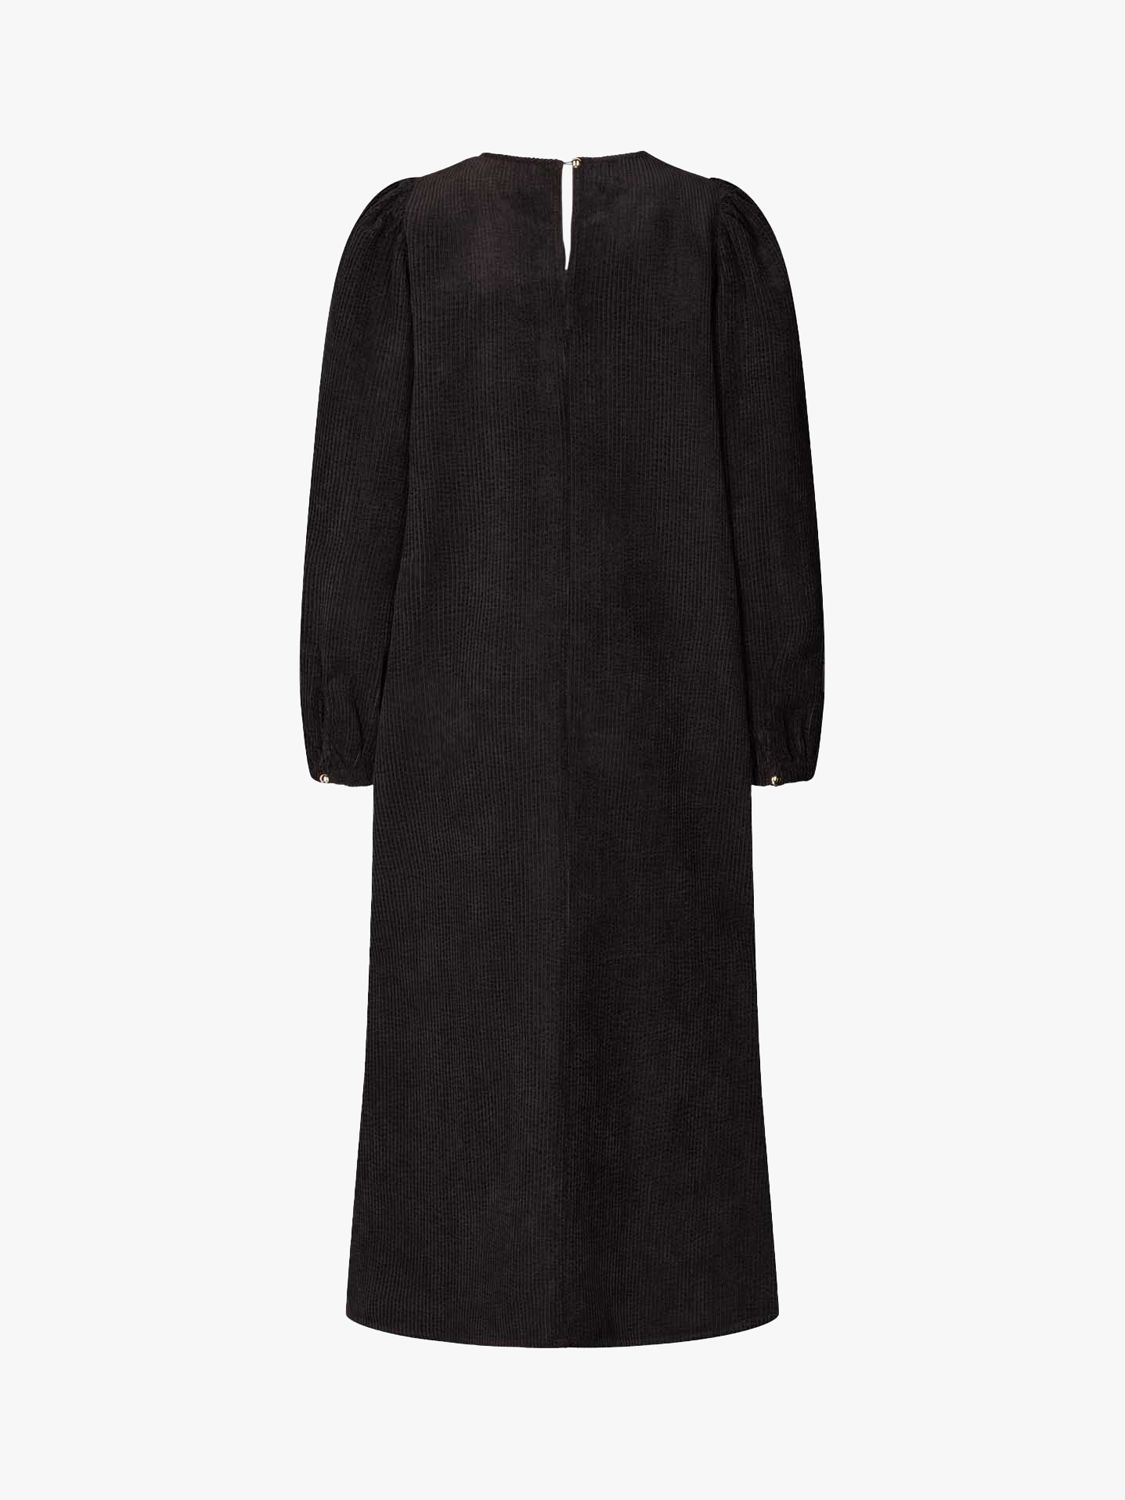 Buy Lollys Laundry Lucas Puff Sleeve Midi Dress Online at johnlewis.com